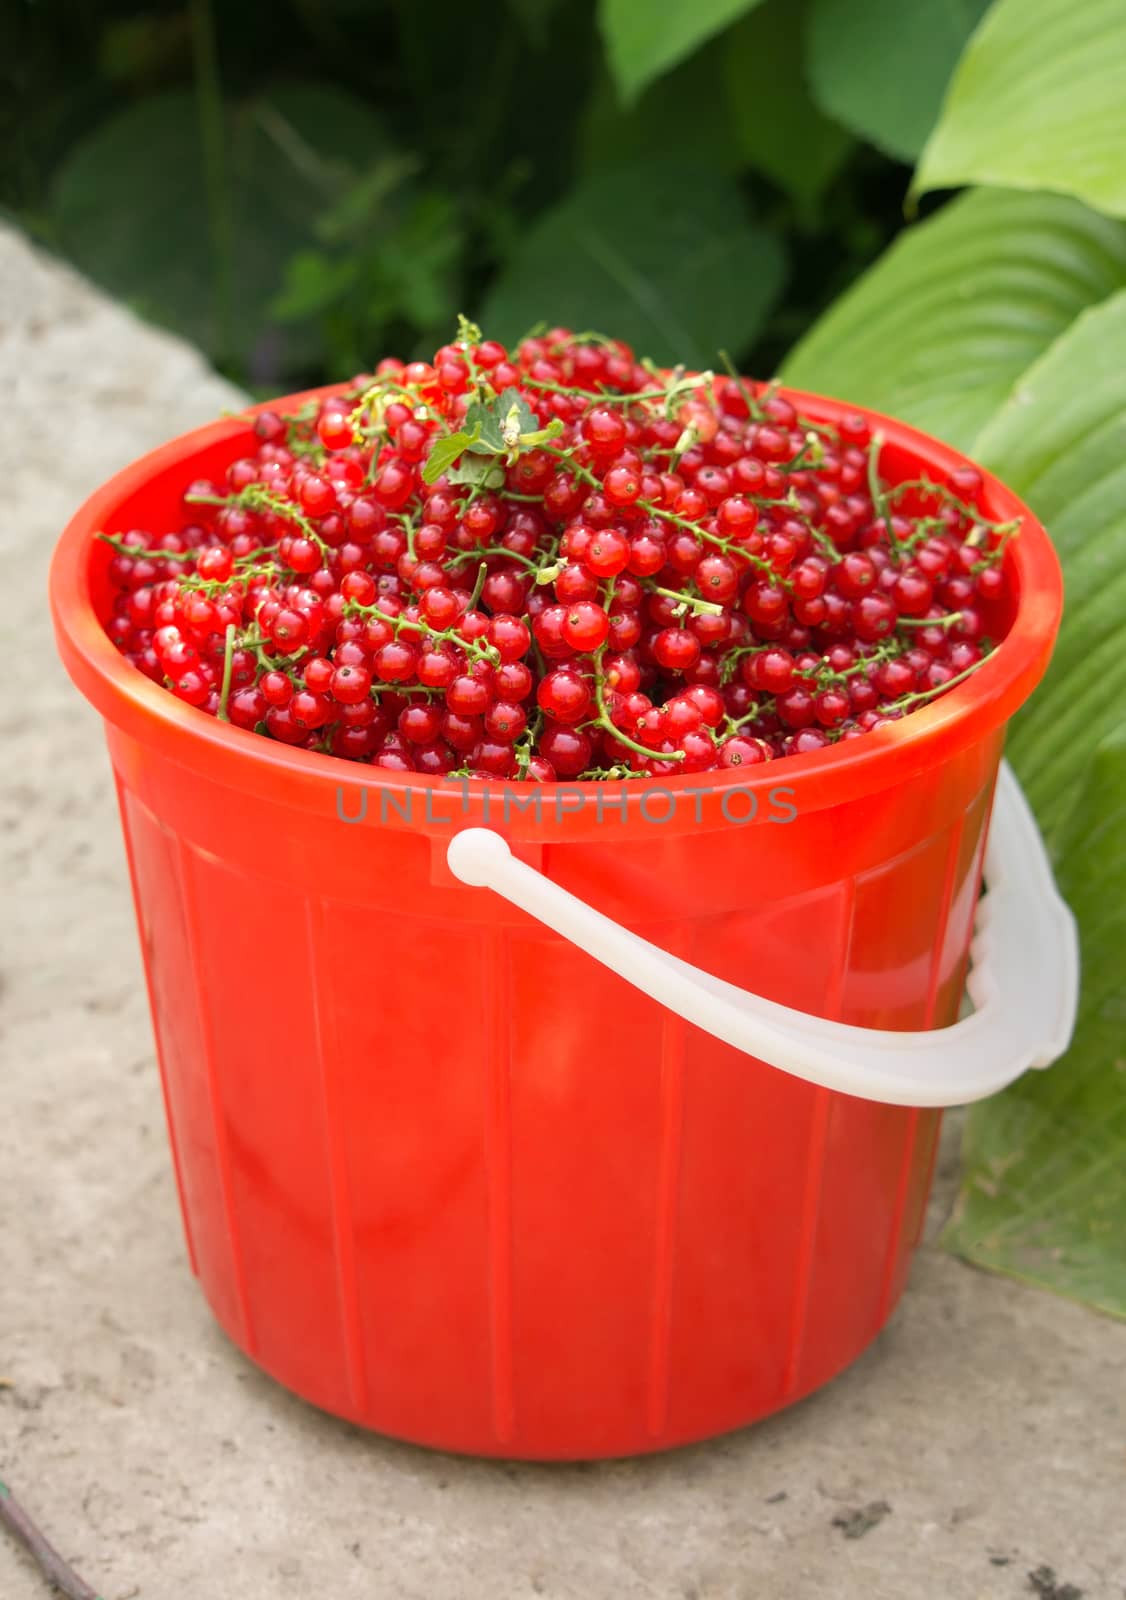 Fresh red currants in a plastic basket
